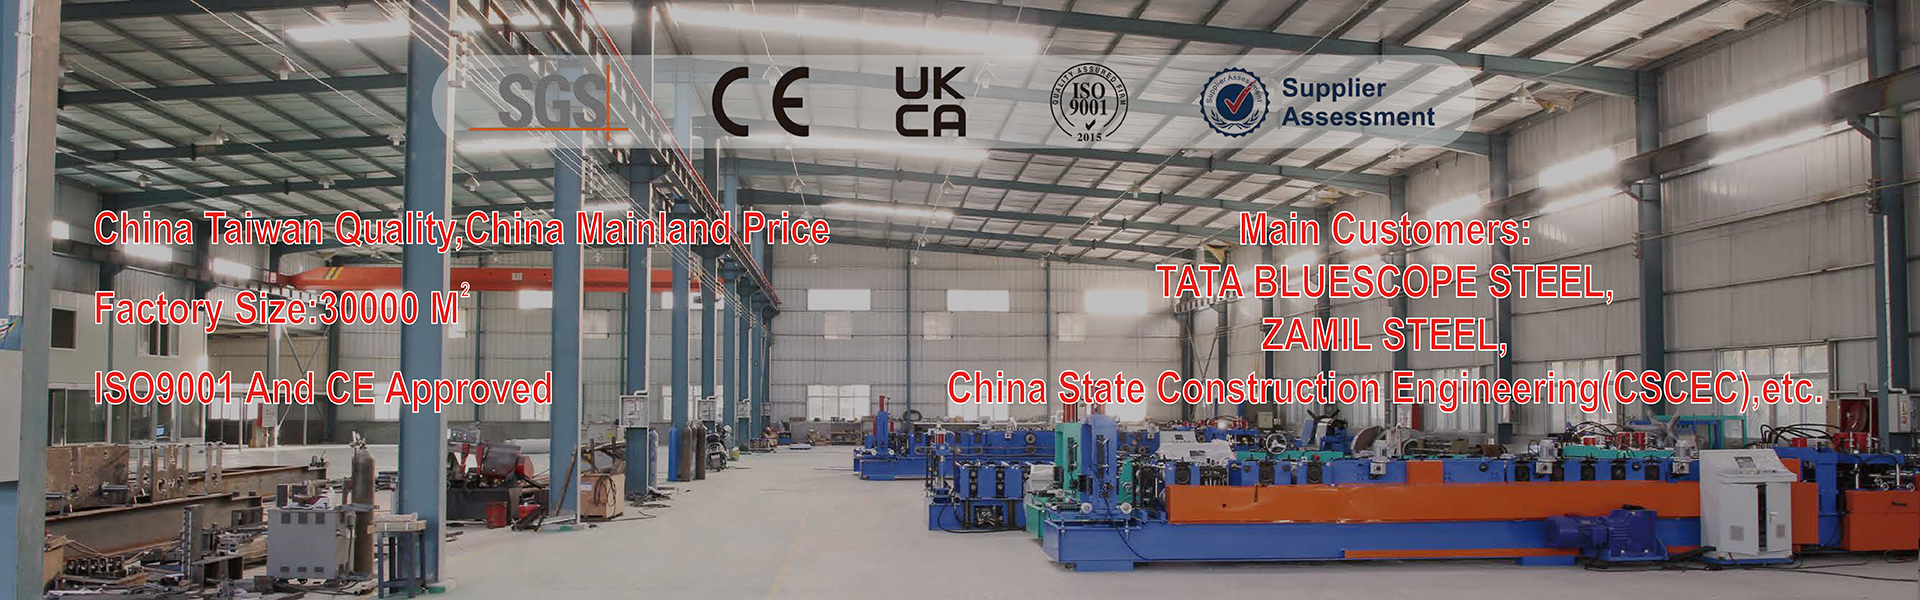 Roll Forming Machine factory with Taiwan Quality,China Price